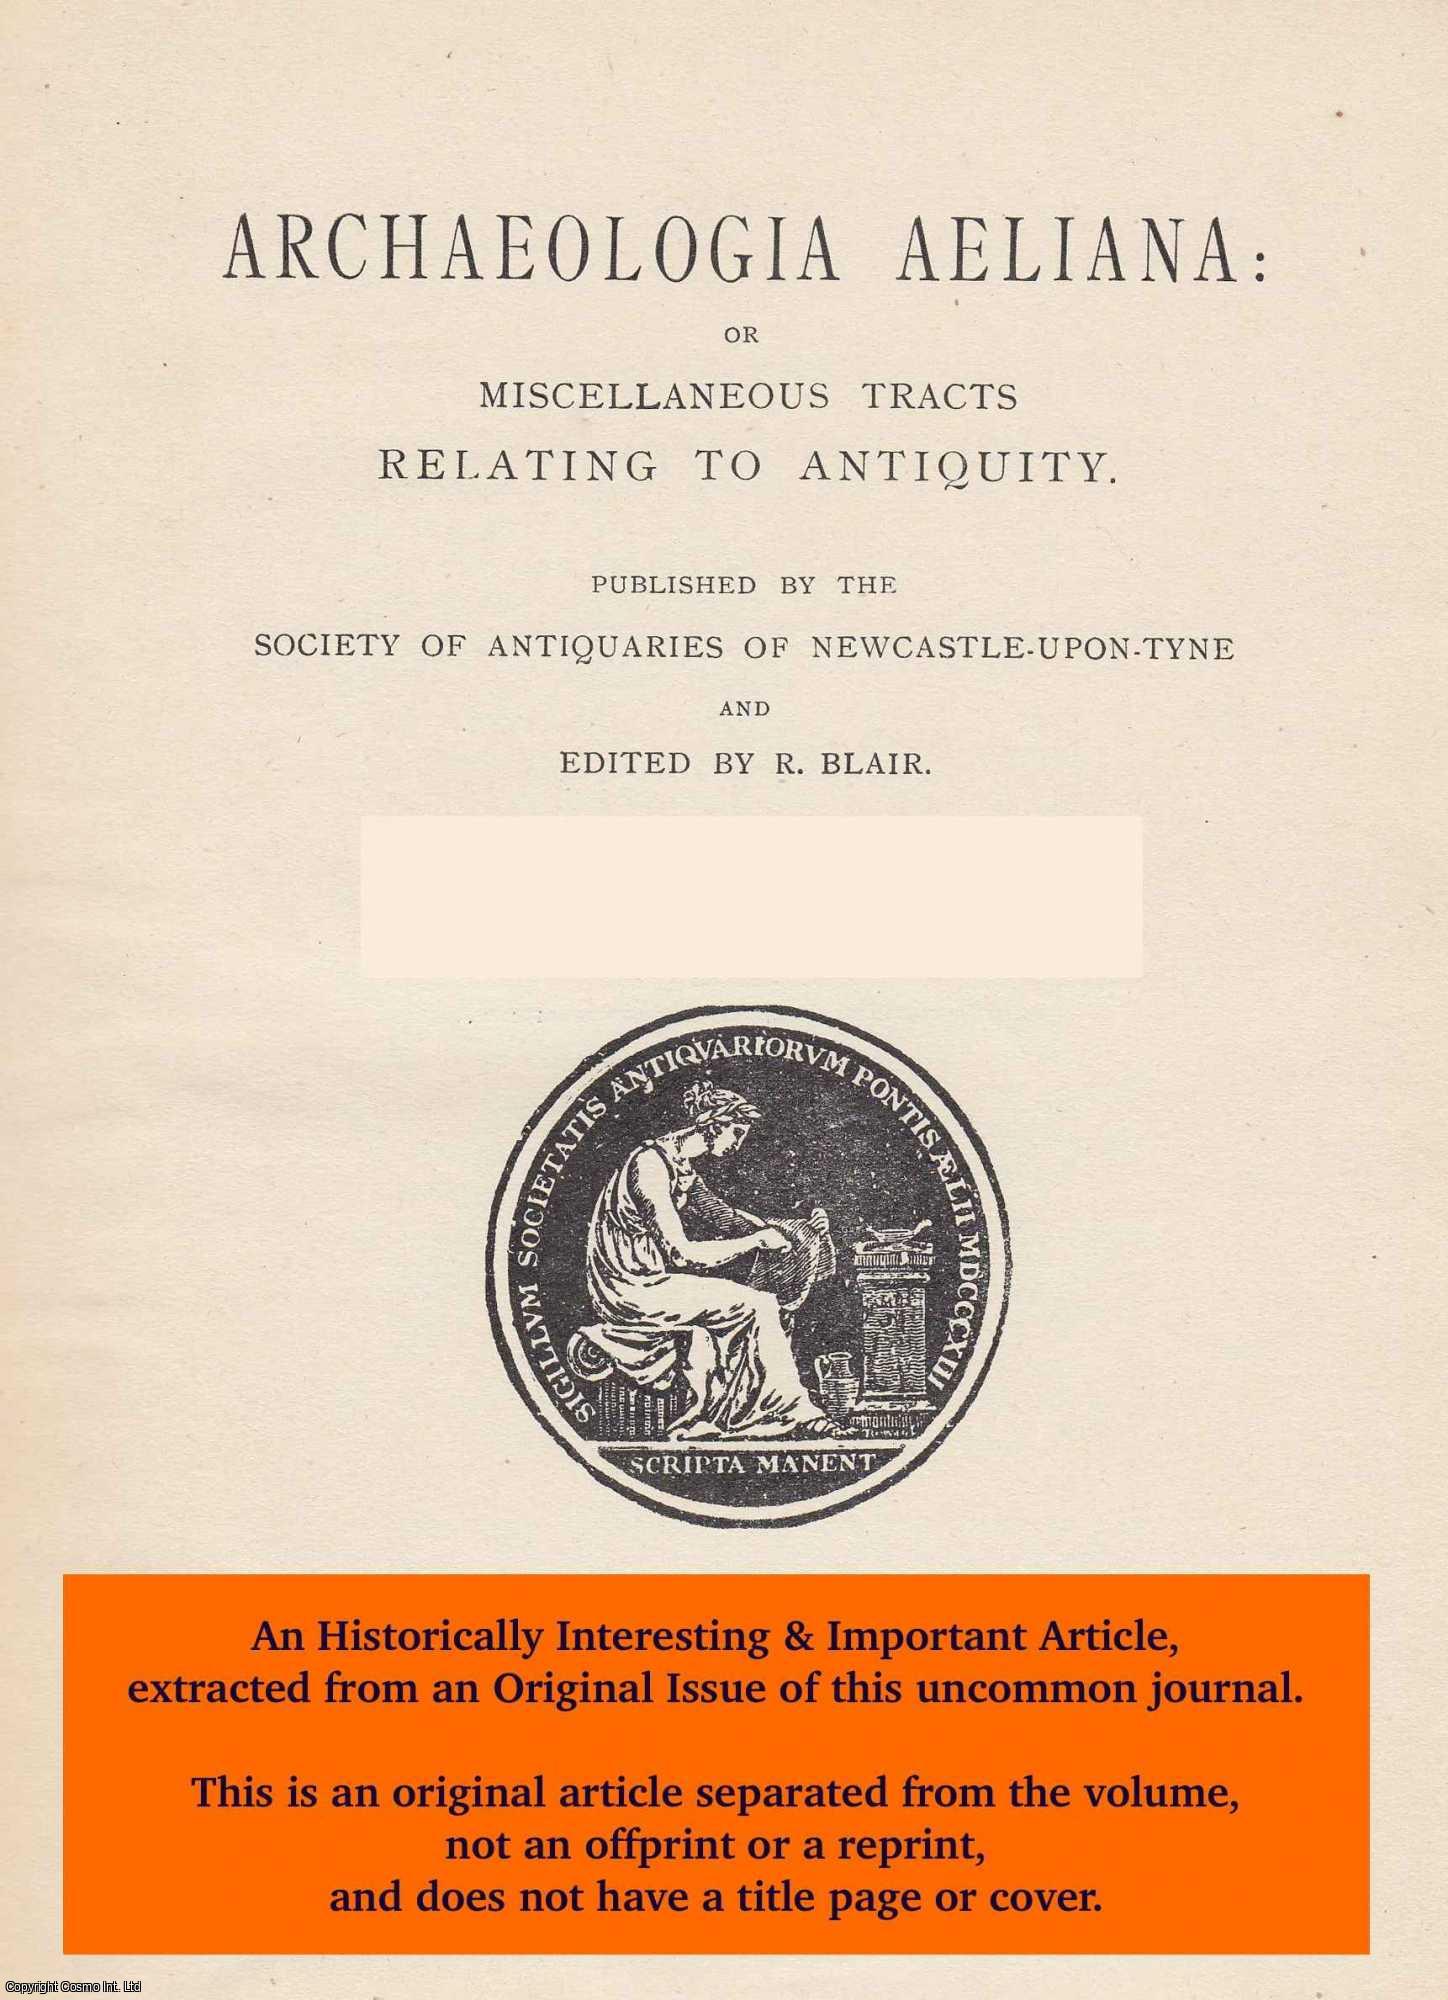 F. Bradshaw, F. - The Decline and Fall of Serfdom in Durham. An original article from The Archaeologia Aeliana: or Miscellaneous Tracts Relating to Antiquity, 1908.